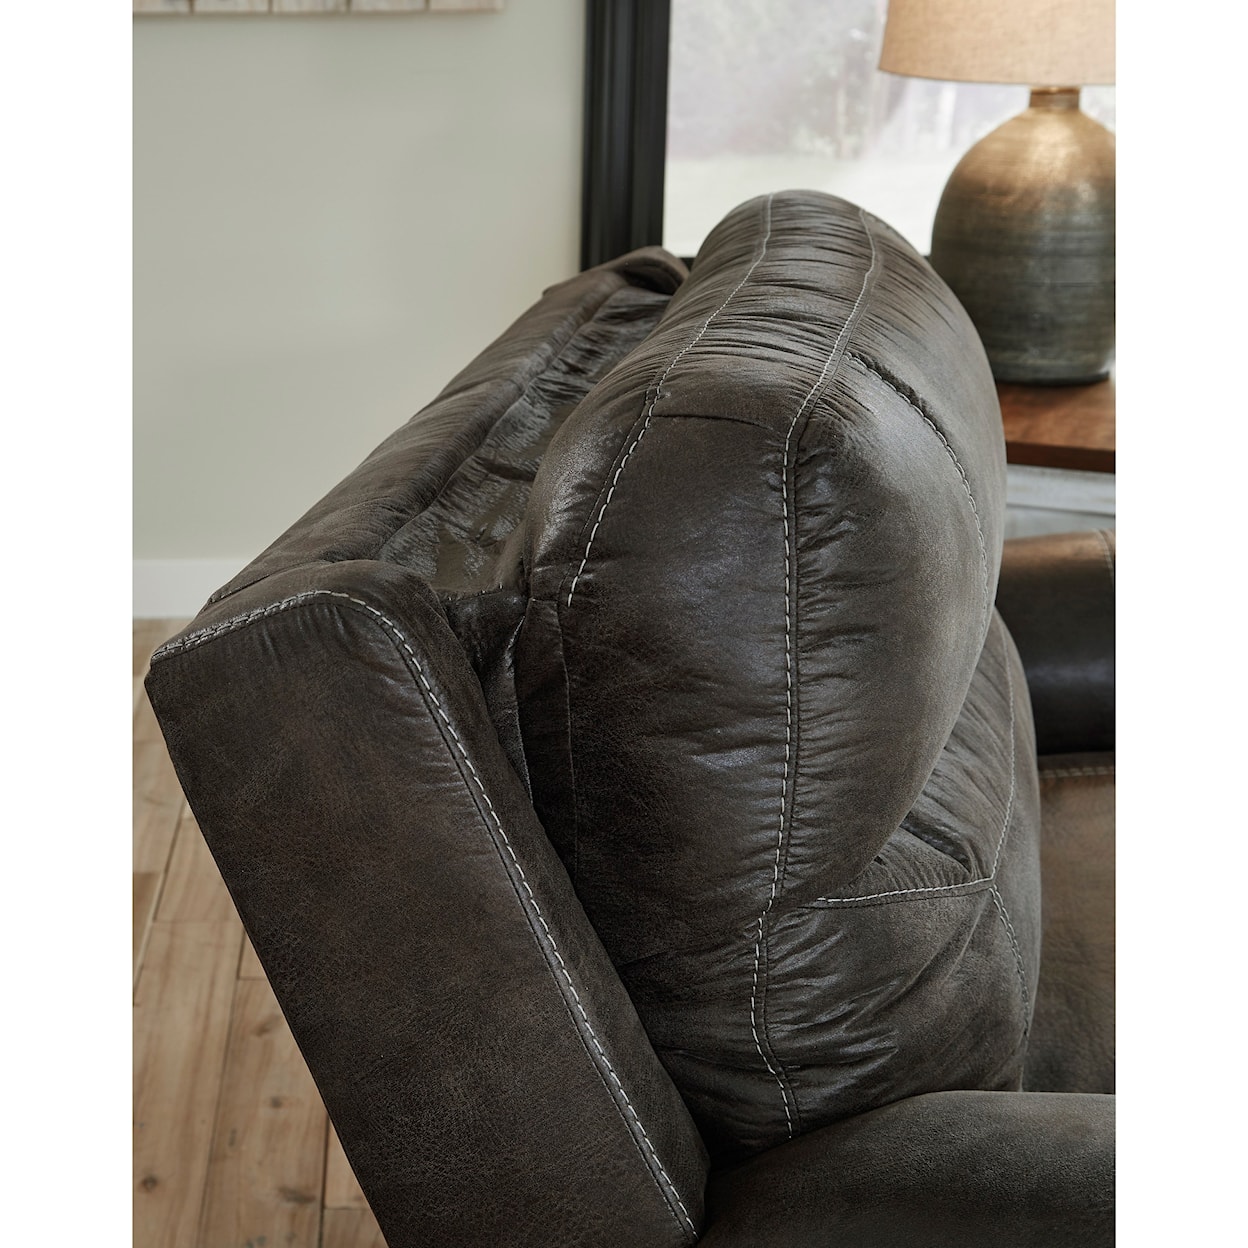 Signature Design by Ashley Grearview Oversized Power Recliner